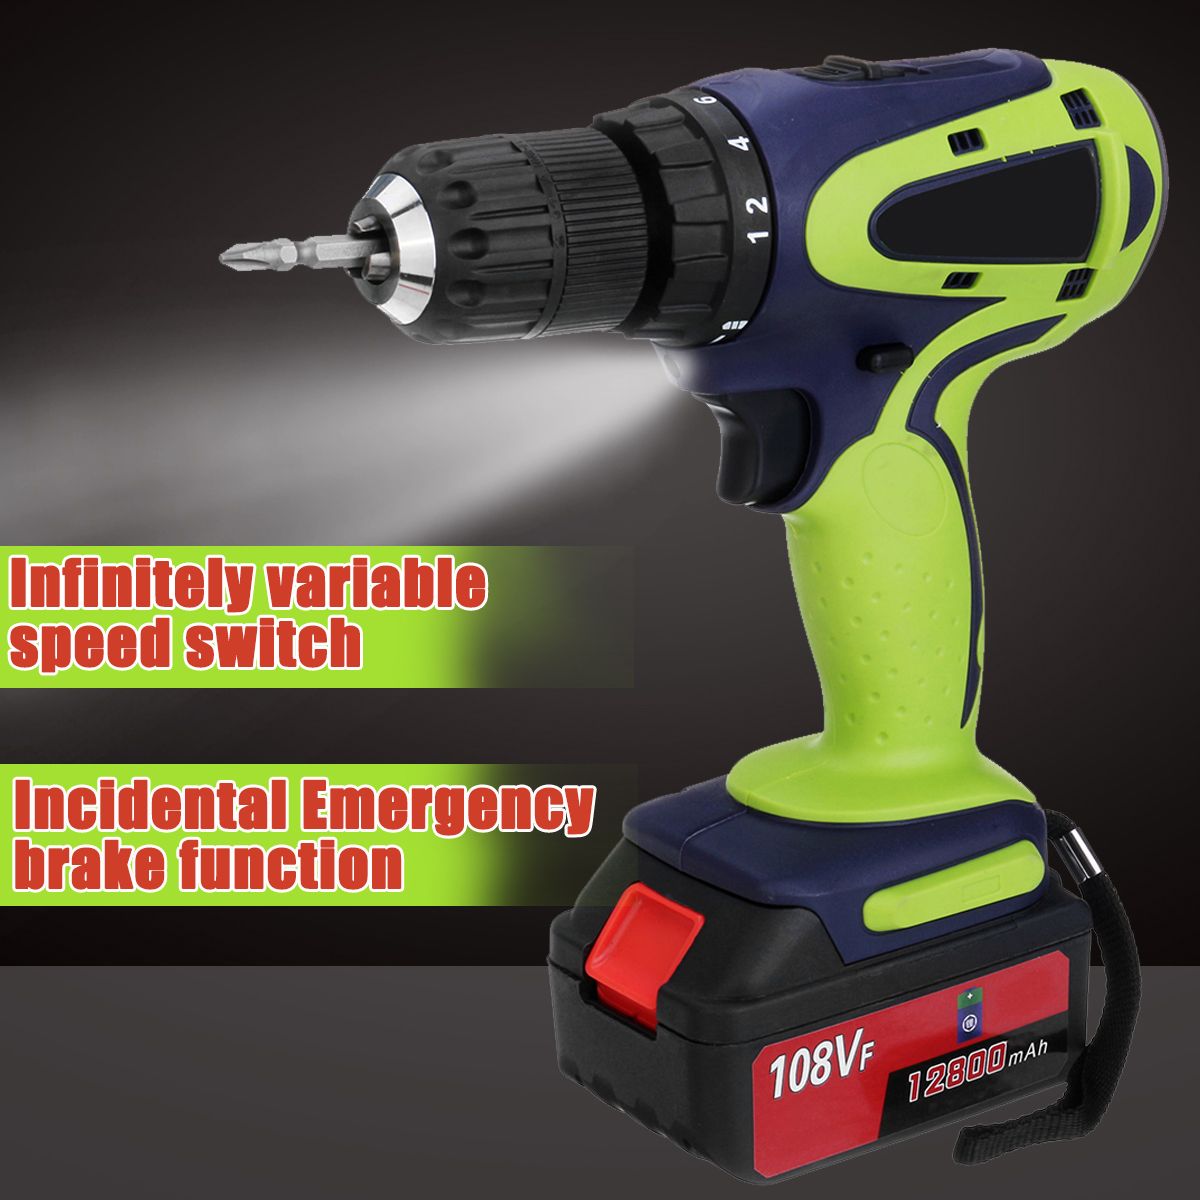 108VF-12800mAh-Dual-Speed-Cordless-Drill-Multifunctional-High-Power-Household-Electric-Drills-W-Acce-1457224